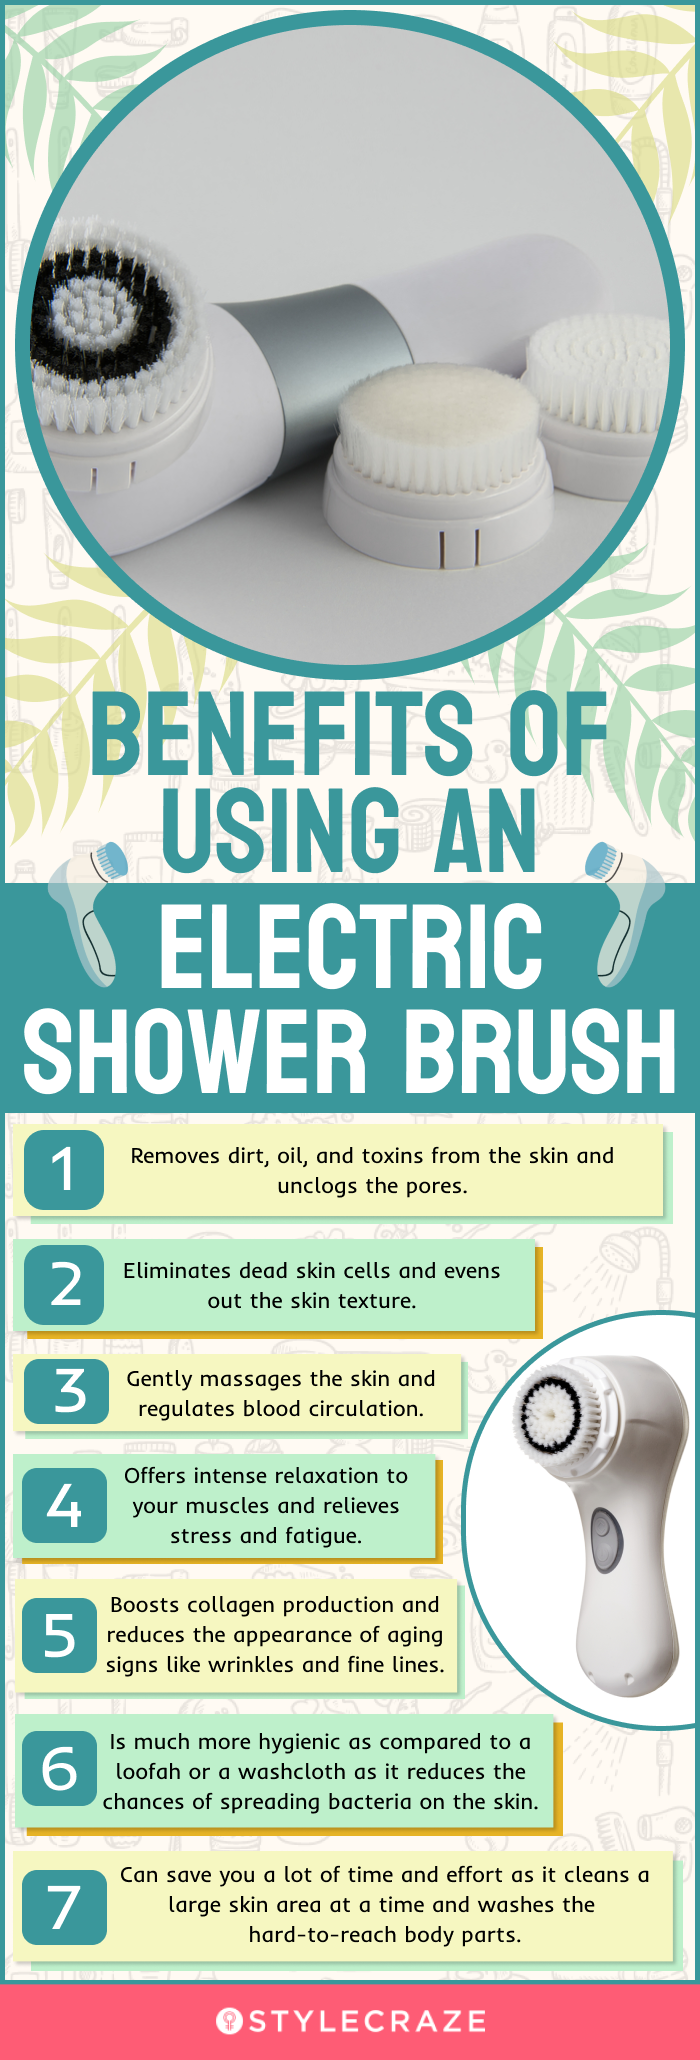 Benefits Of Using An Electric Shower Brush (infographic)